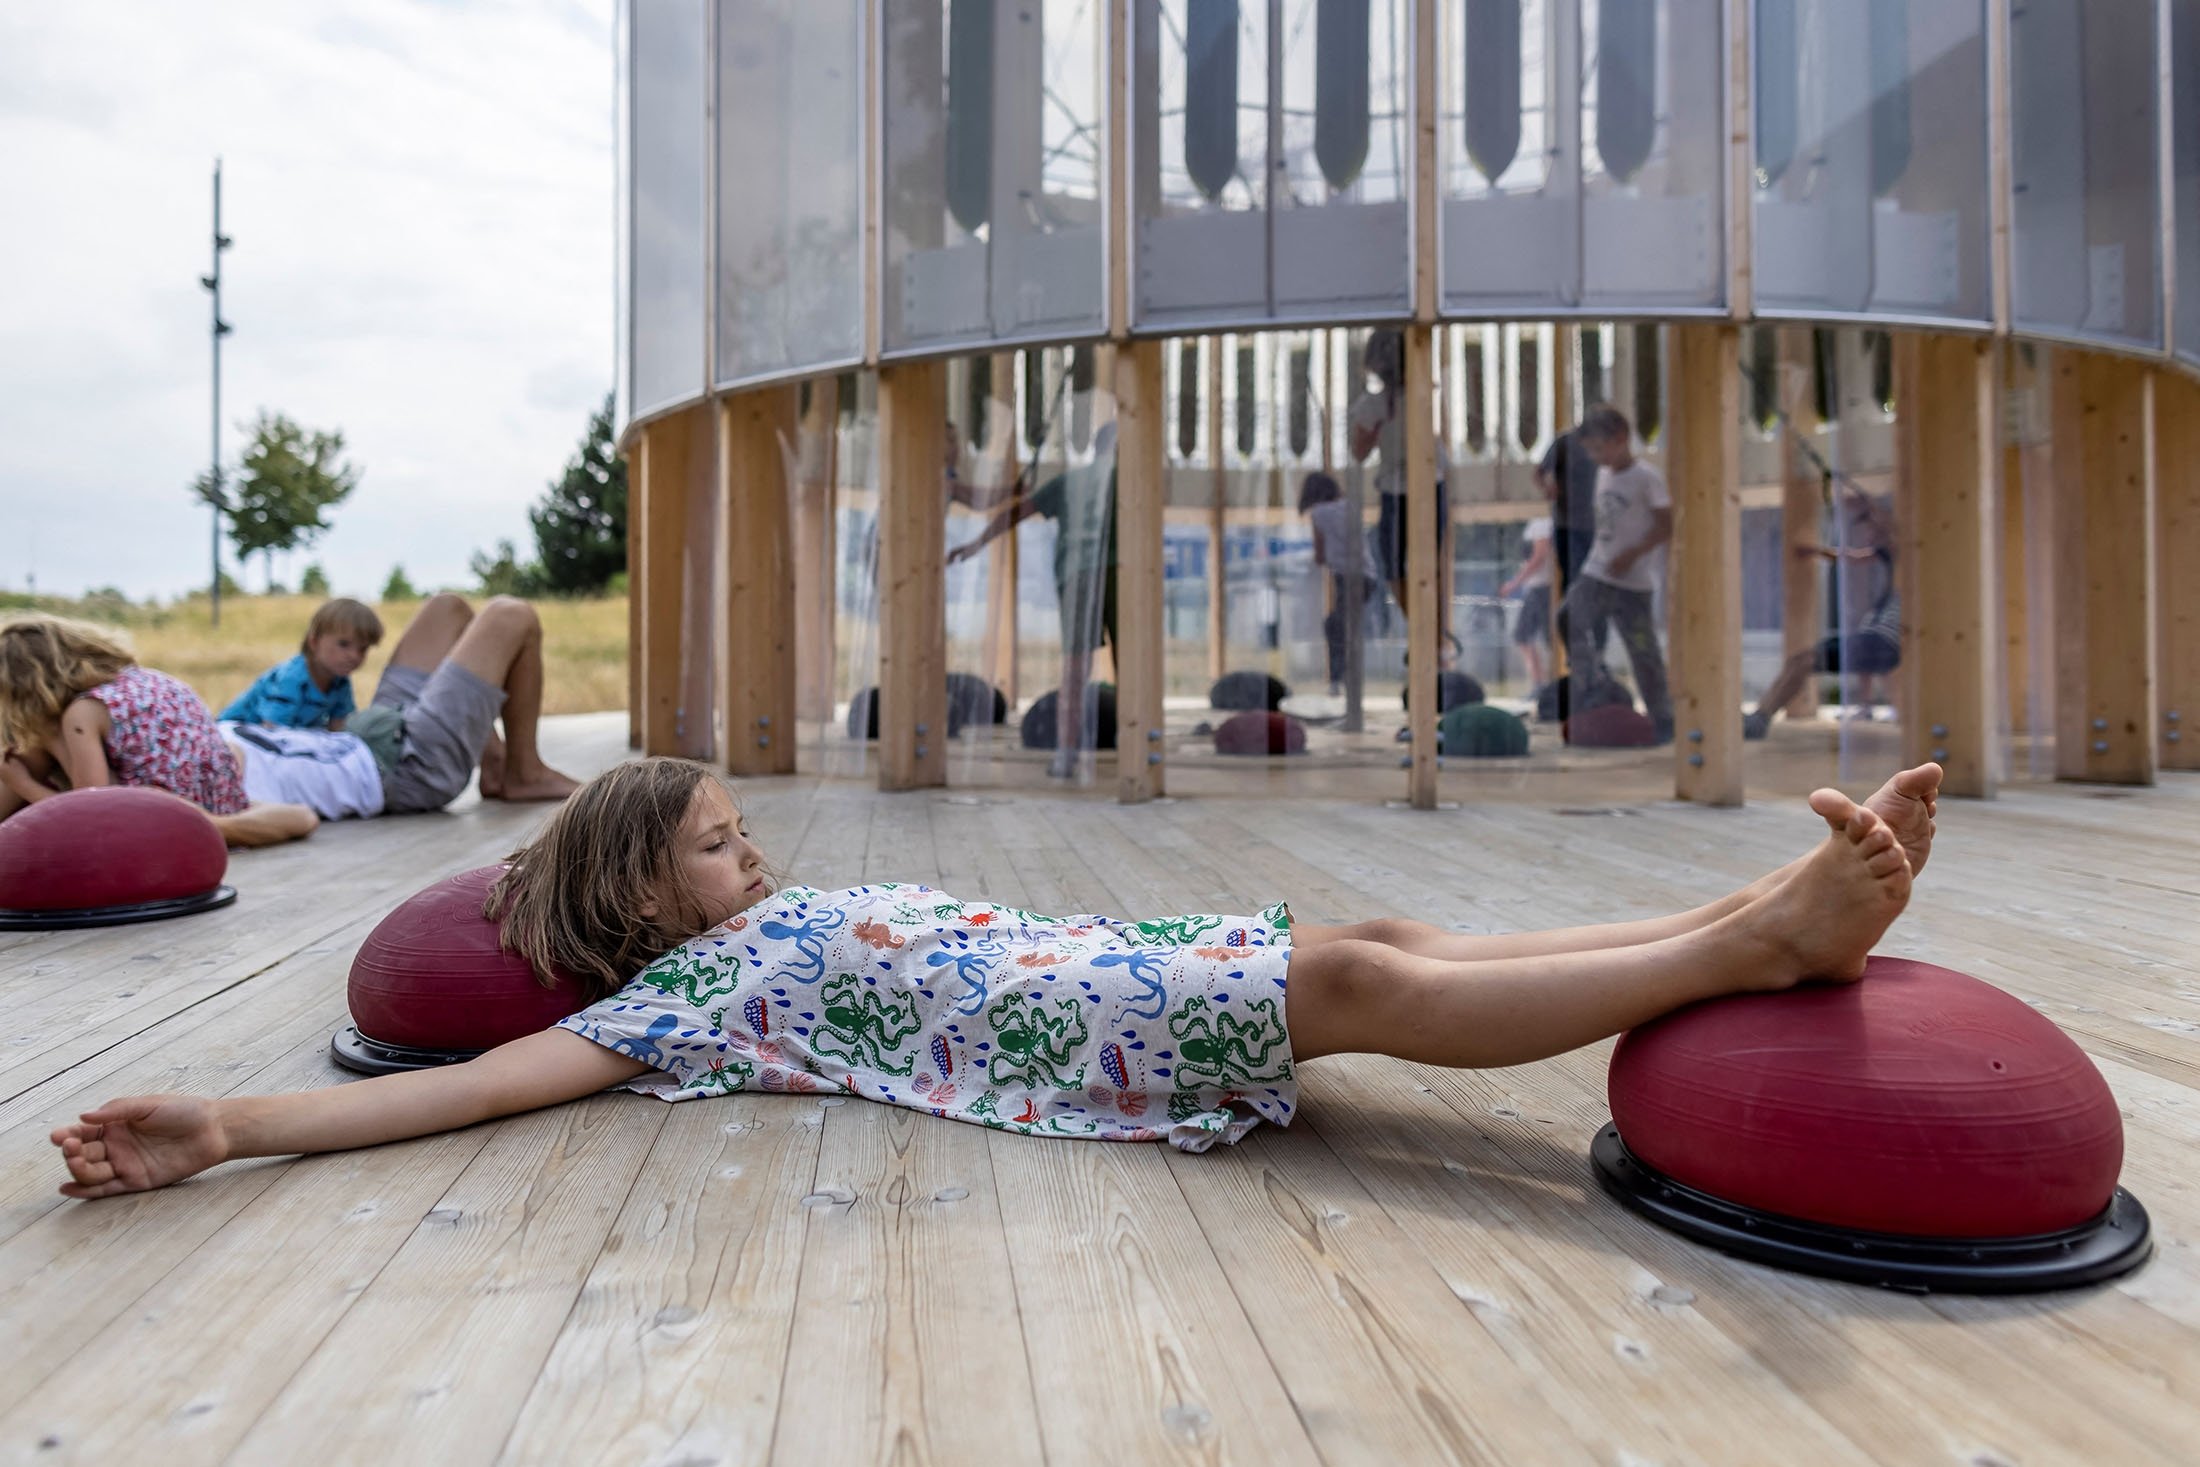 Nine-year-old Anielka rests after playing in an AirBubble, an innovative playground providing clean air thanks to algae that absorbs pollutants and CO2, in Warsaw, Poland, July 26, 2021. (AFP Photo)